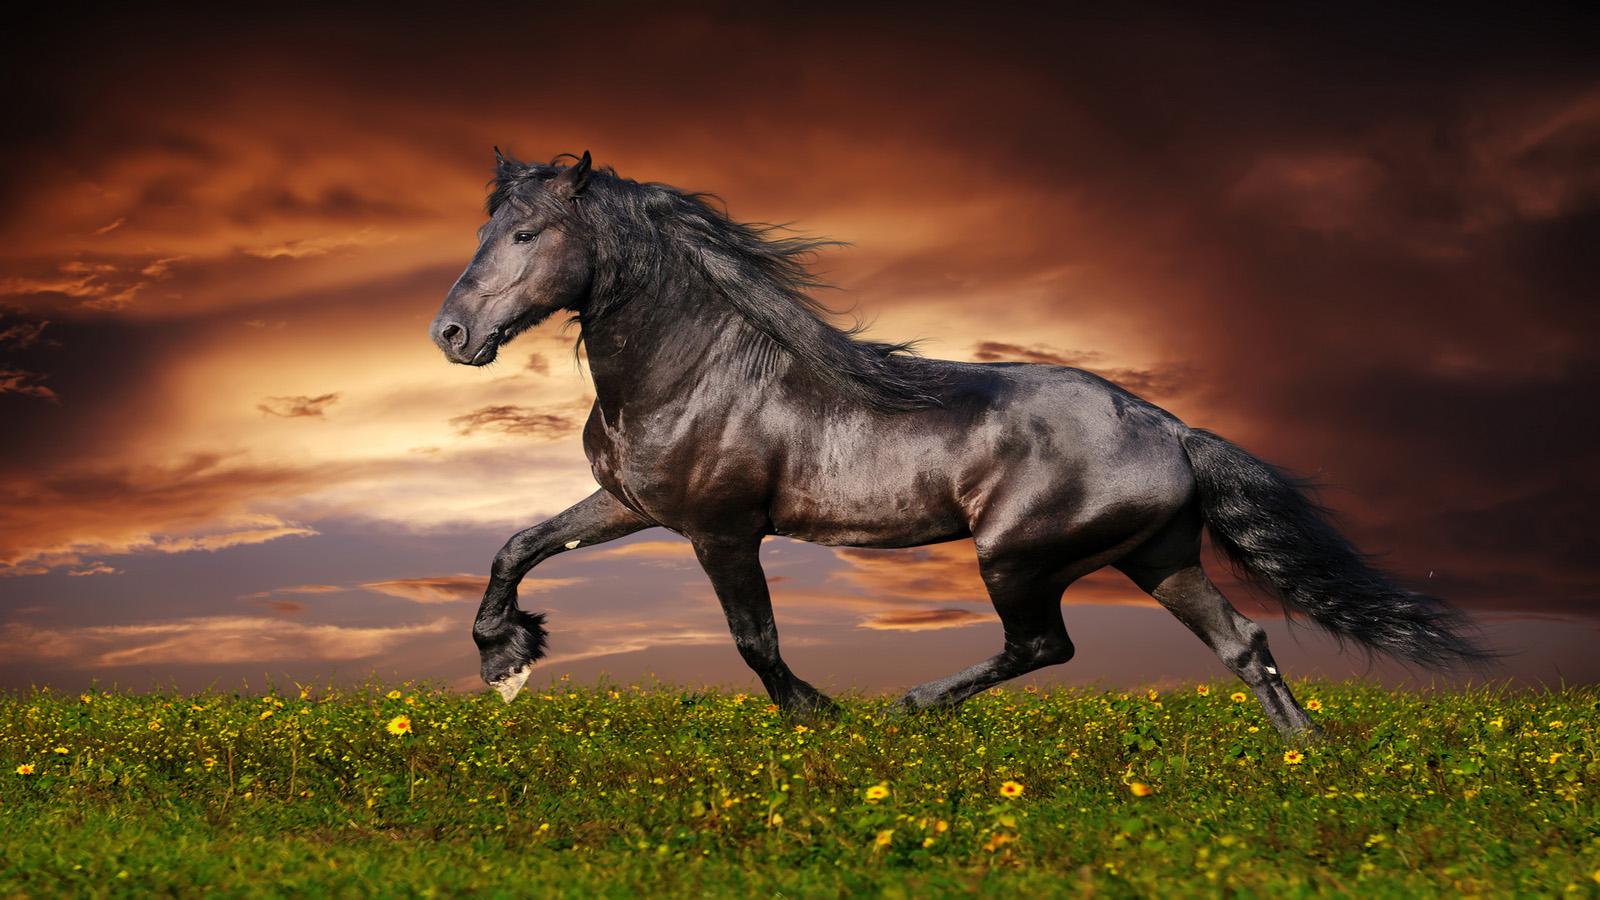 HD Wallpaper Live For Android Horse